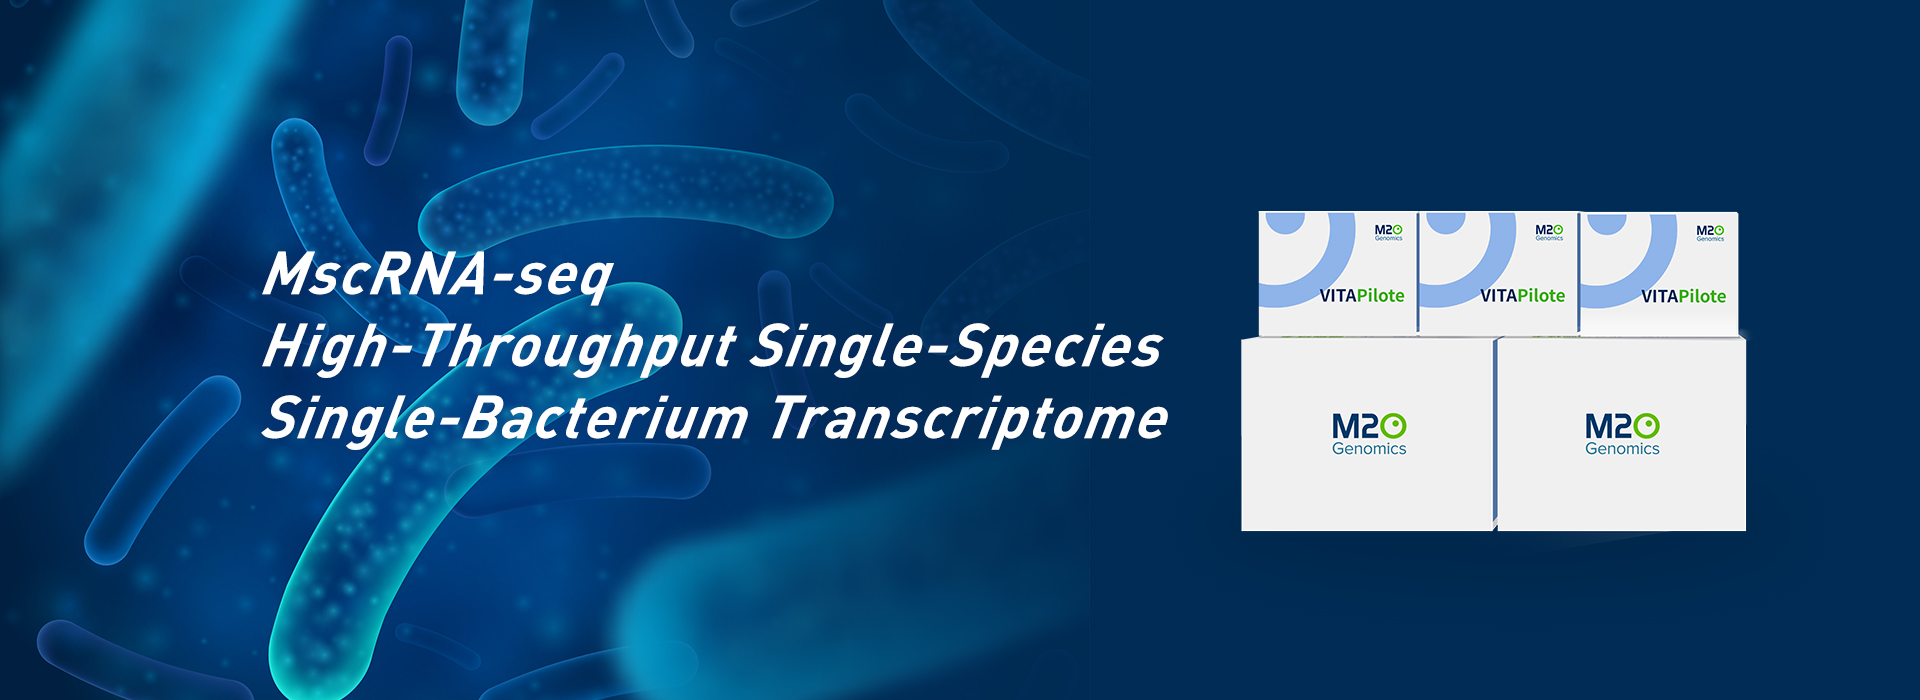 Single-Cell Transcriptome for Cultured Bacterial Samples